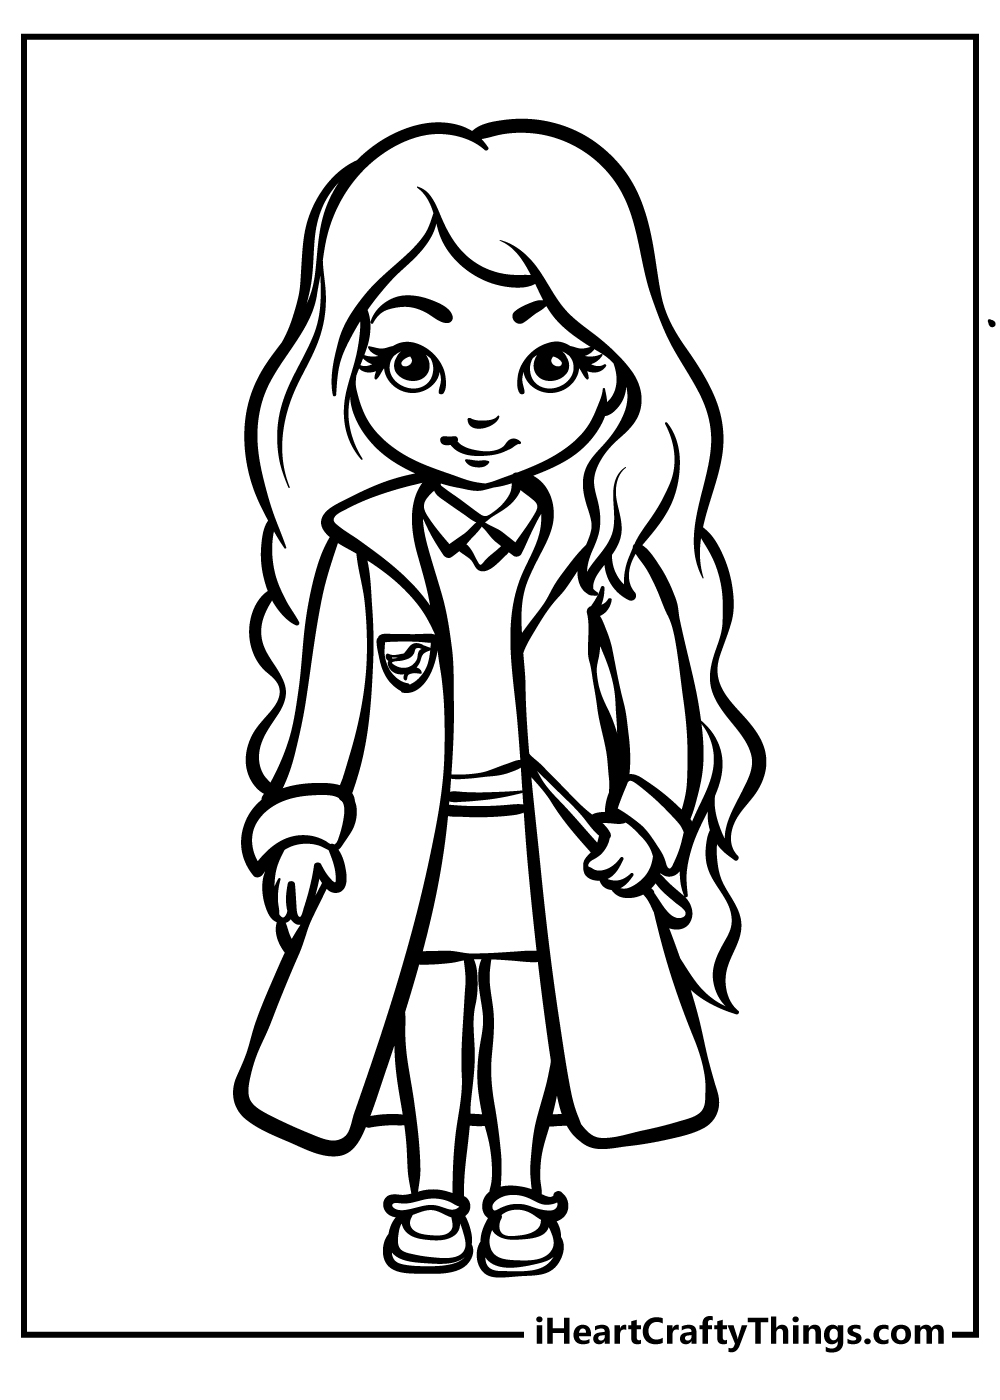 Harry potter coloring pages free printables